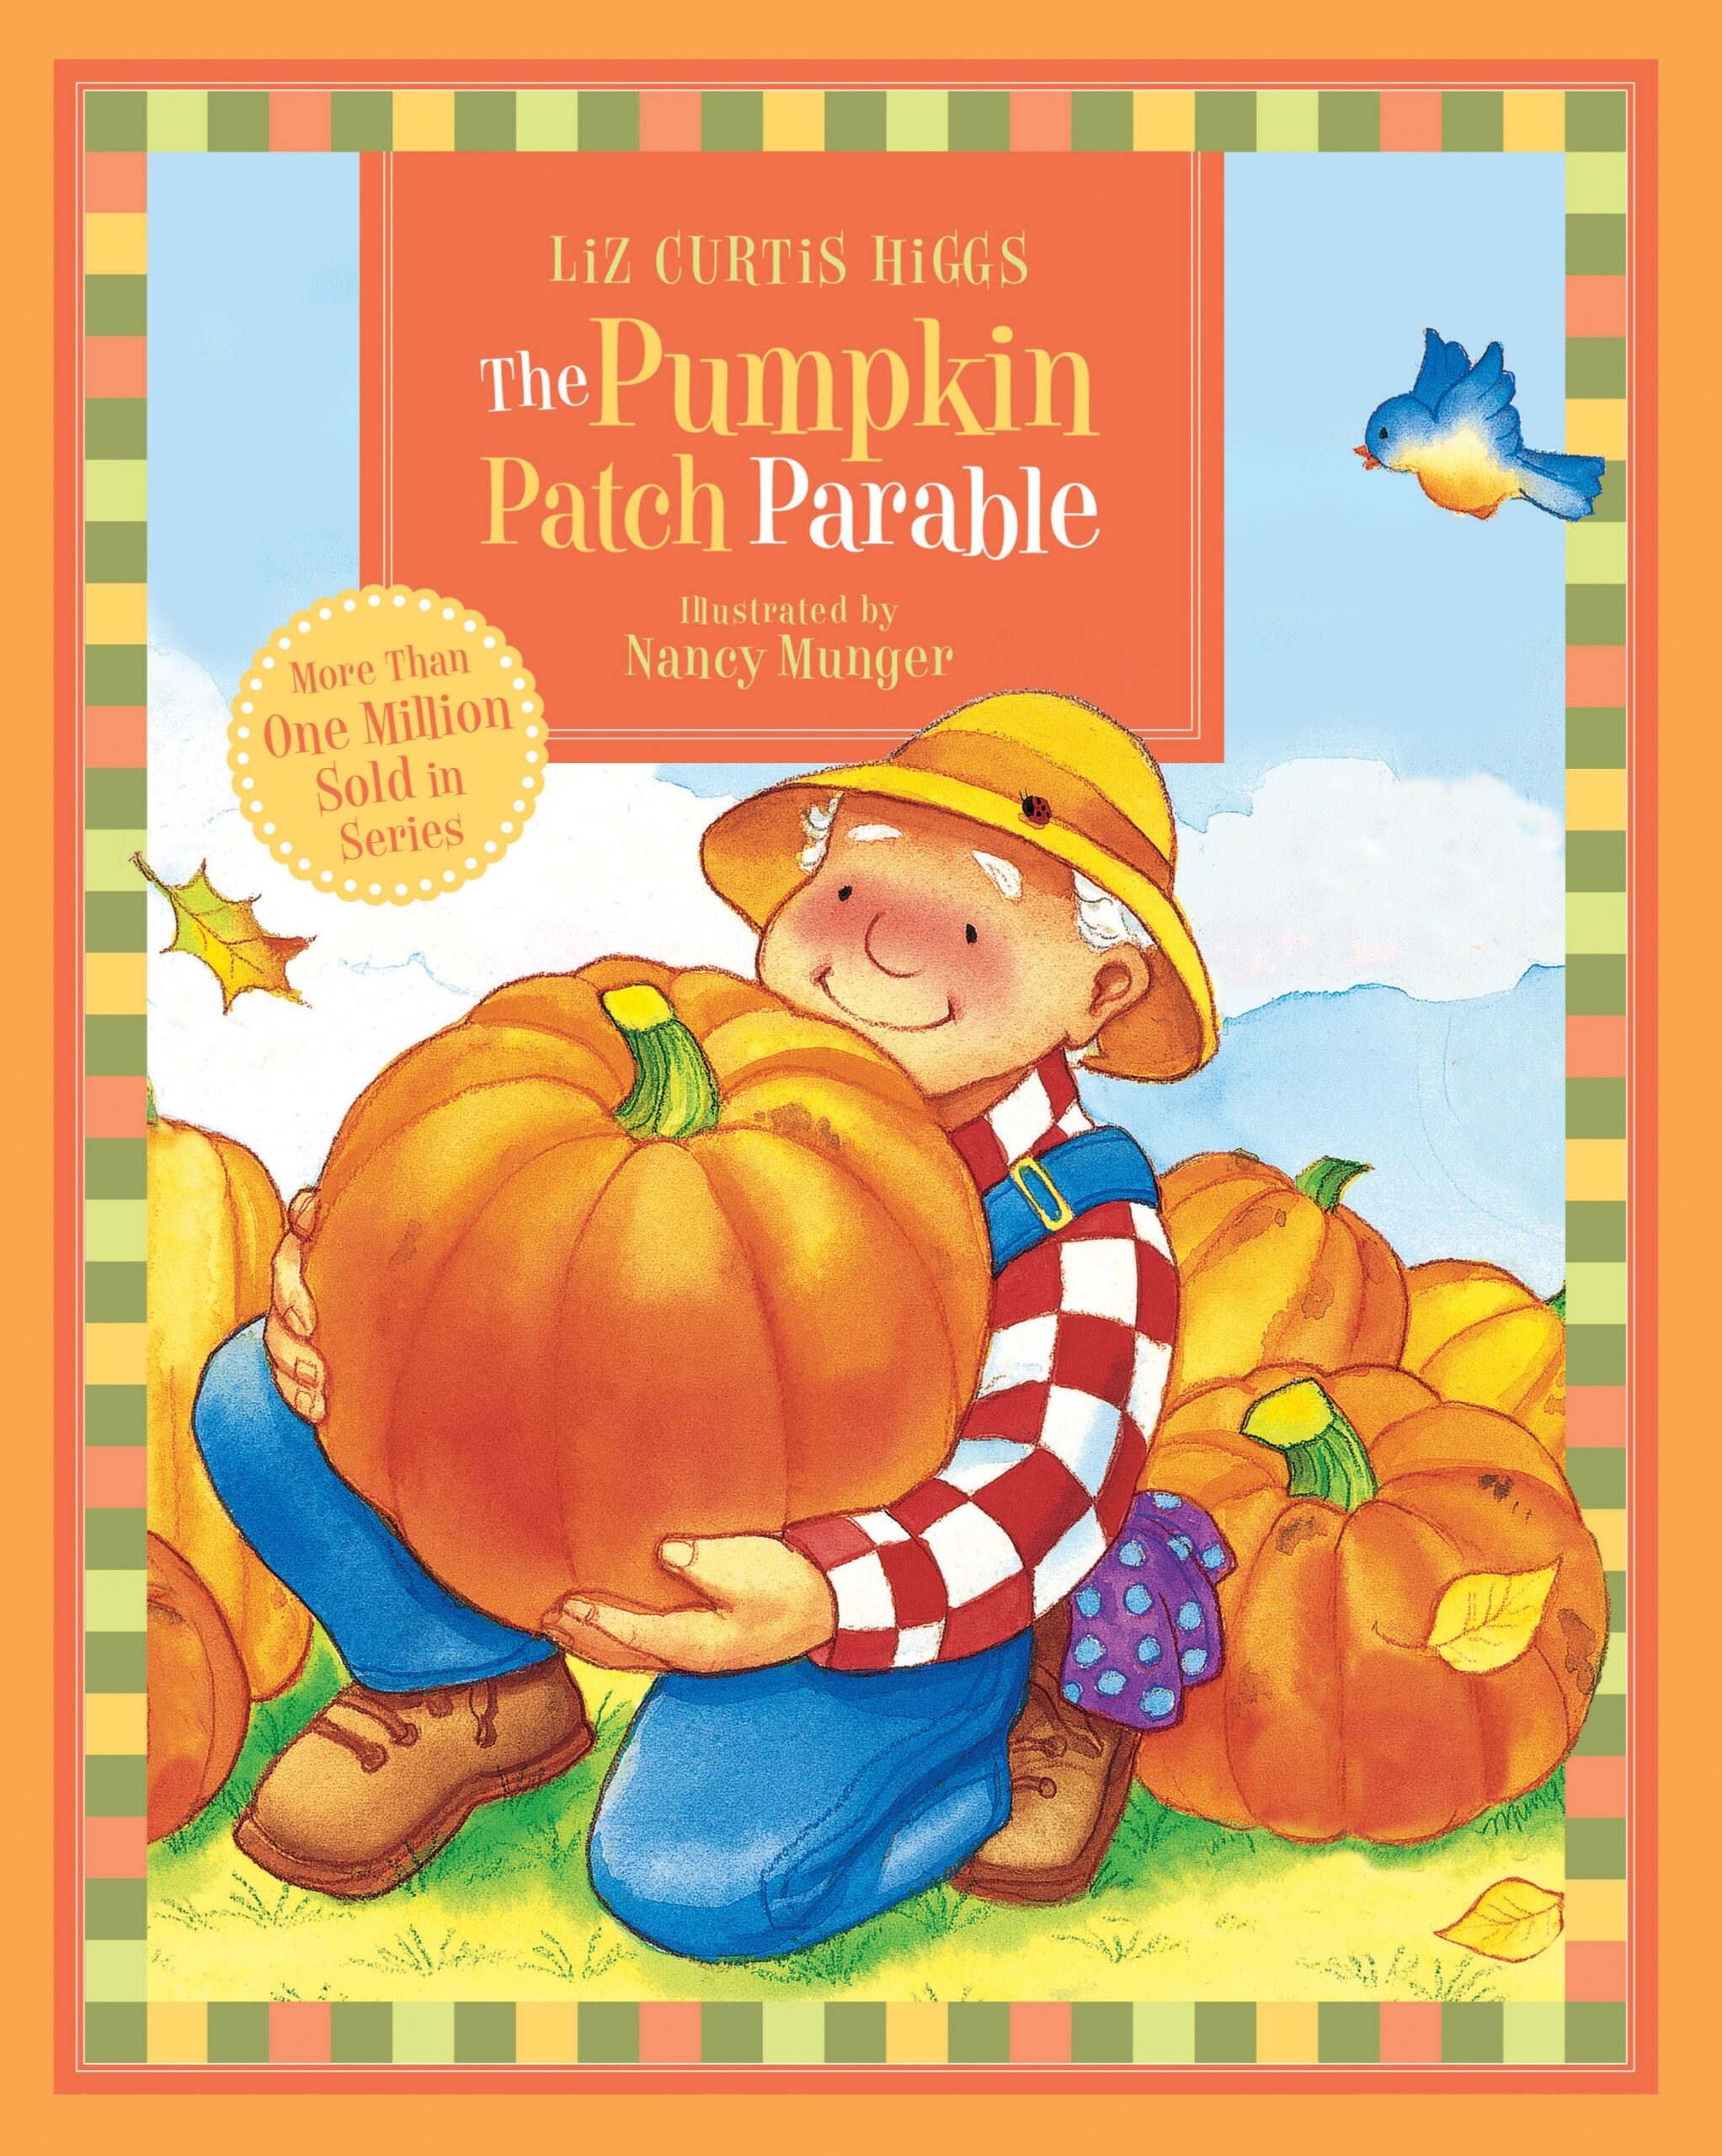 A Meaningful Parable Experience The Gospel Through The Story Of A Pumpkin